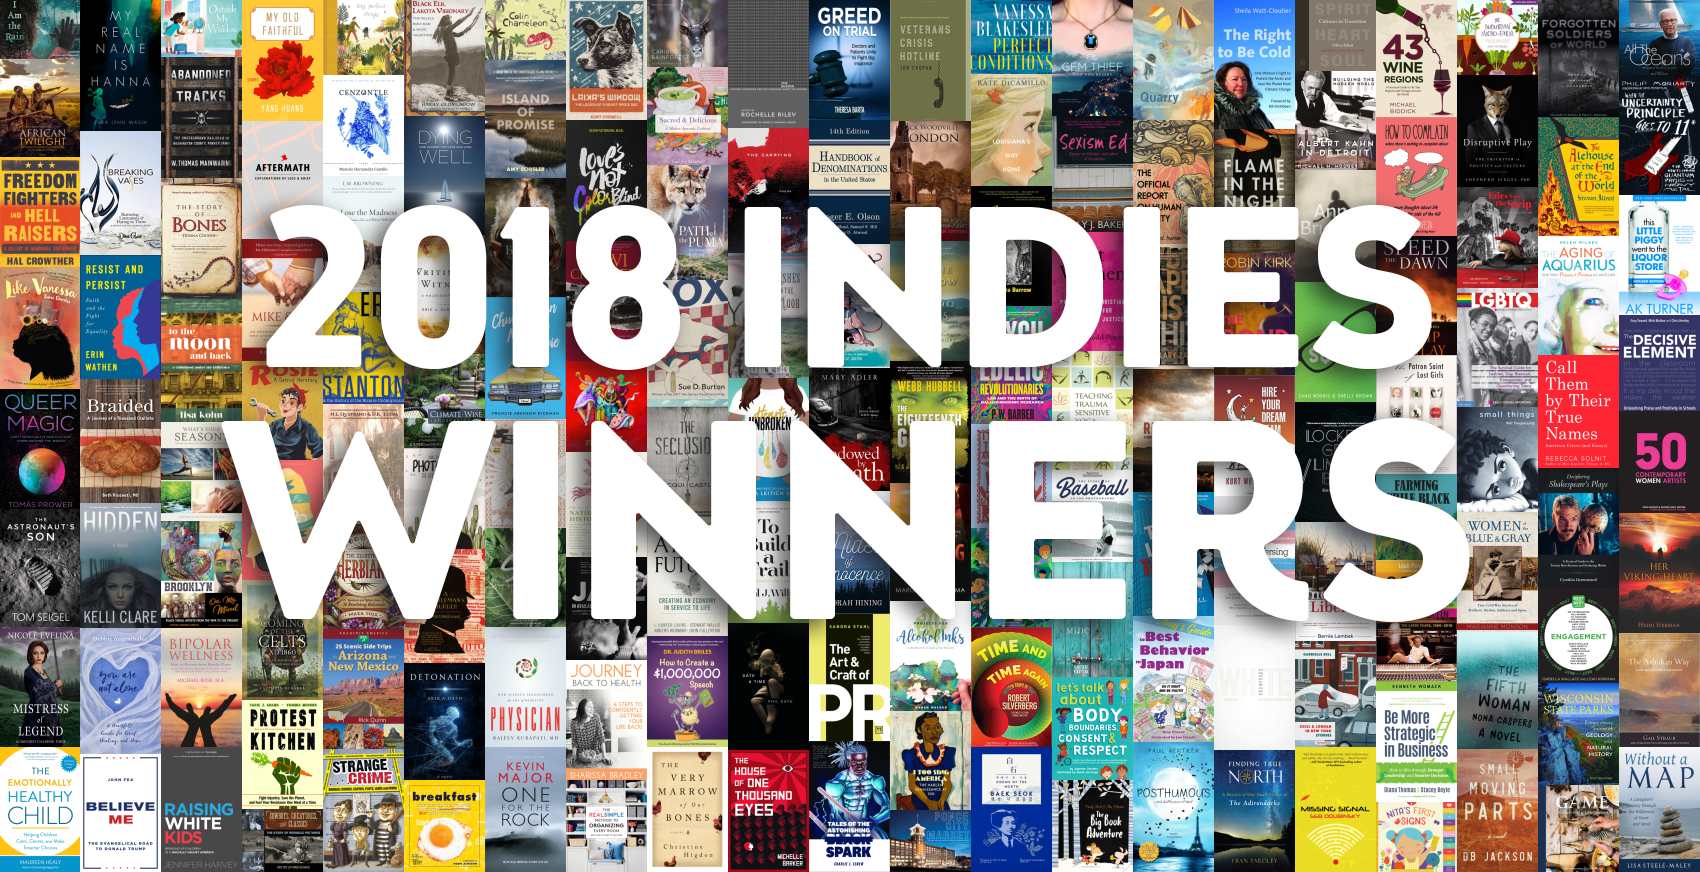 Collage of 2018 INDIES winners’ book covers with text “2018 INDIES Winners”.